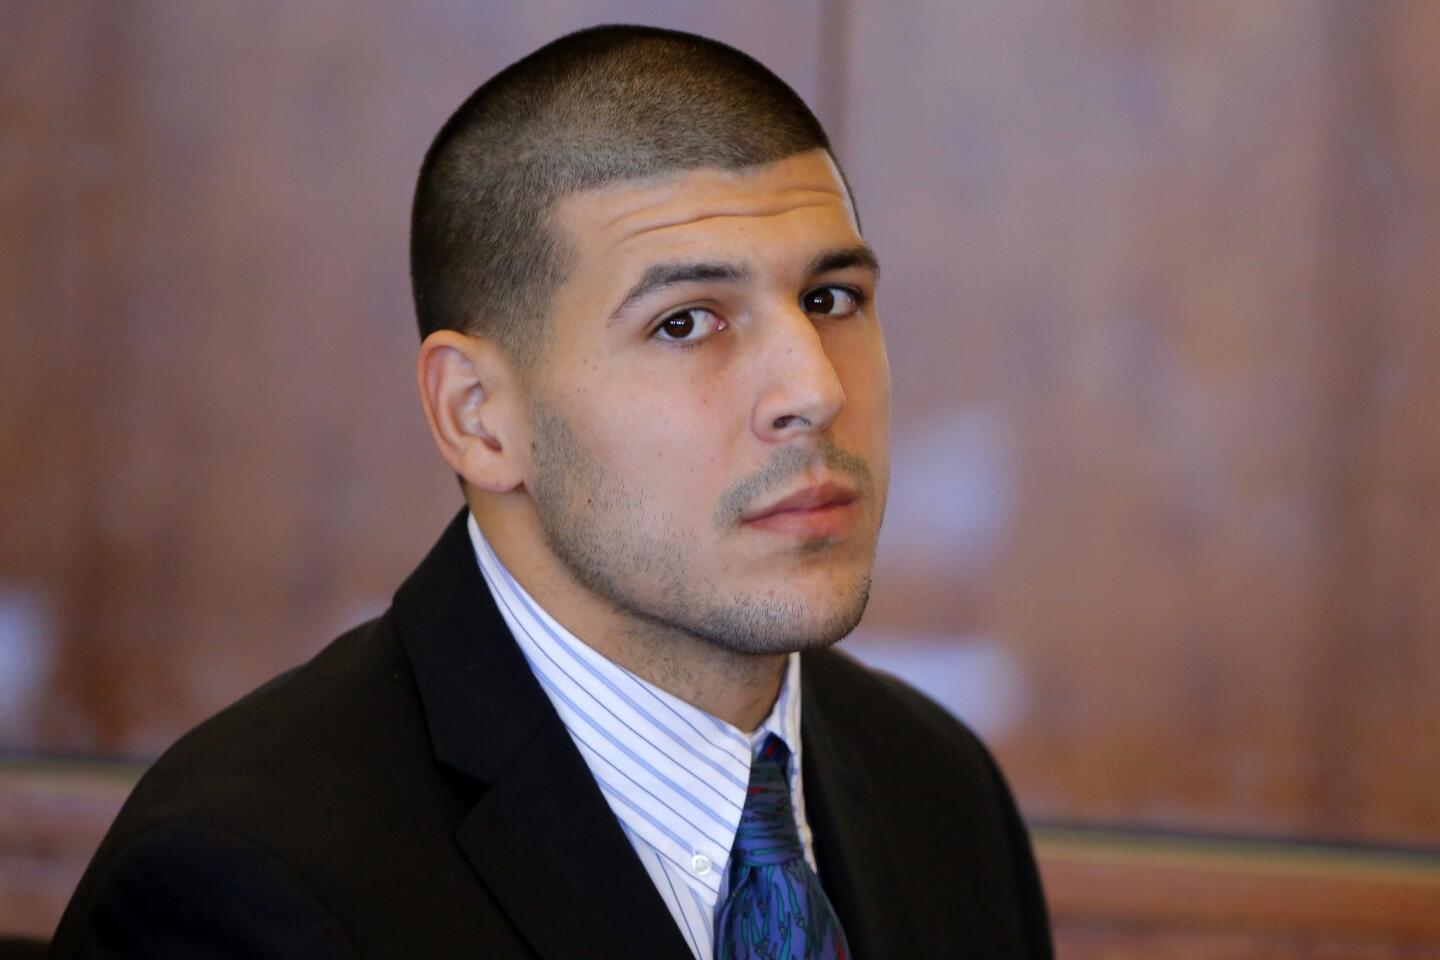 Aaron Hernandez, former player for the NFL's New England Patriots football team, attends a pre-trial hearing at the Bristol County Superior Court in Fall River, Massachusetts October 9, 2013, in connection with the death of semi-pro football player Odin Lloyd in June. Hernandez, who was a rising star in the NFL before his arrest and release by the Patriots, has pleaded not guilty.